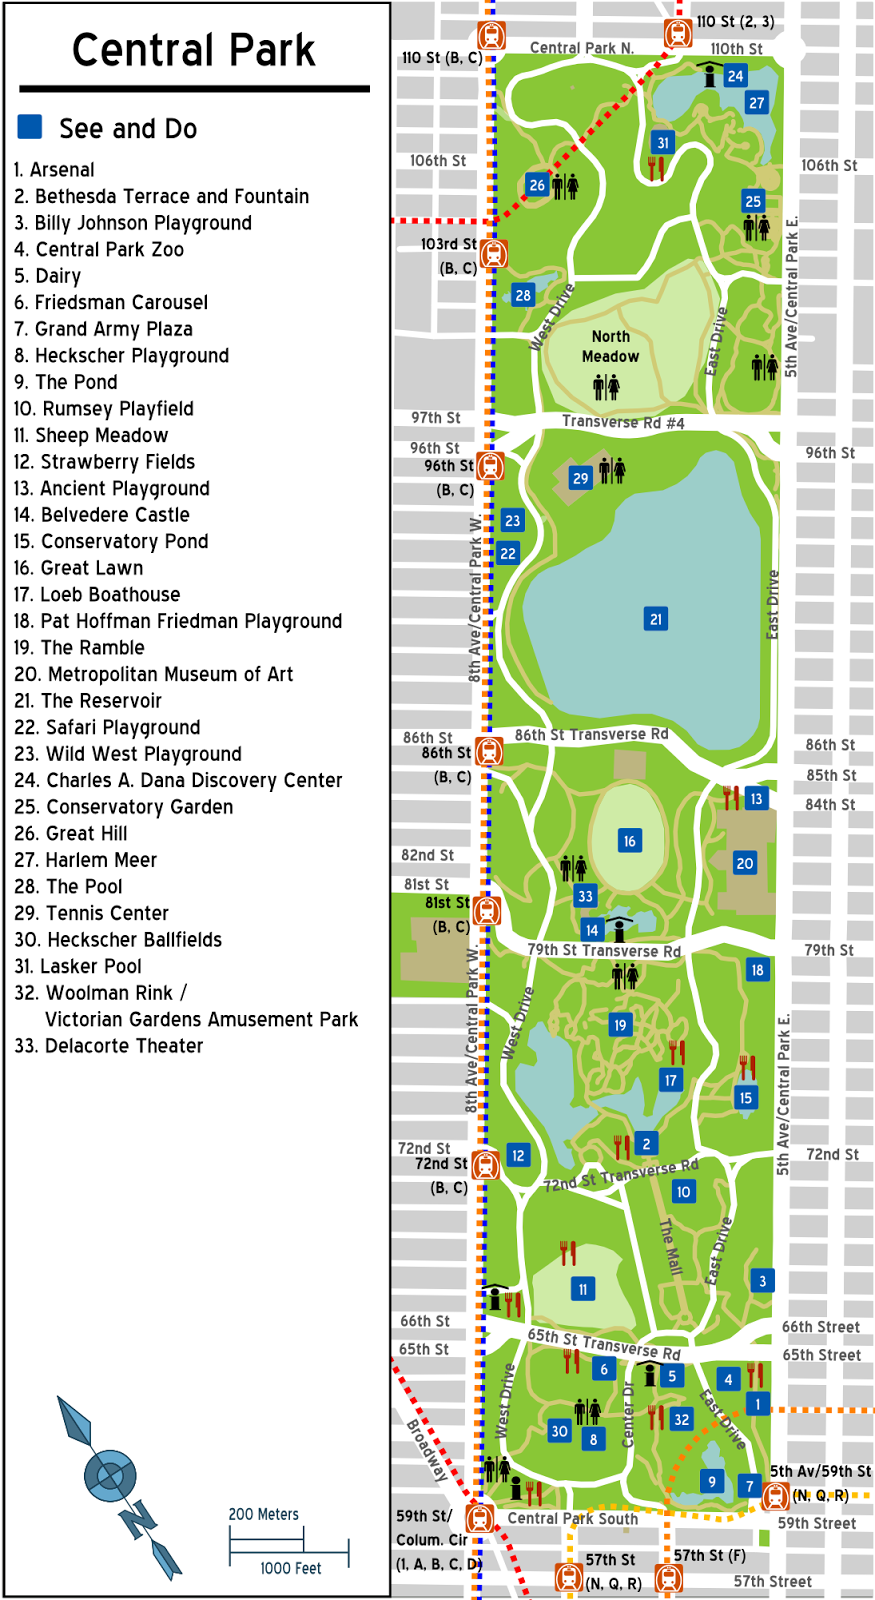 The 10 Year Plan: A Visit to Central Park